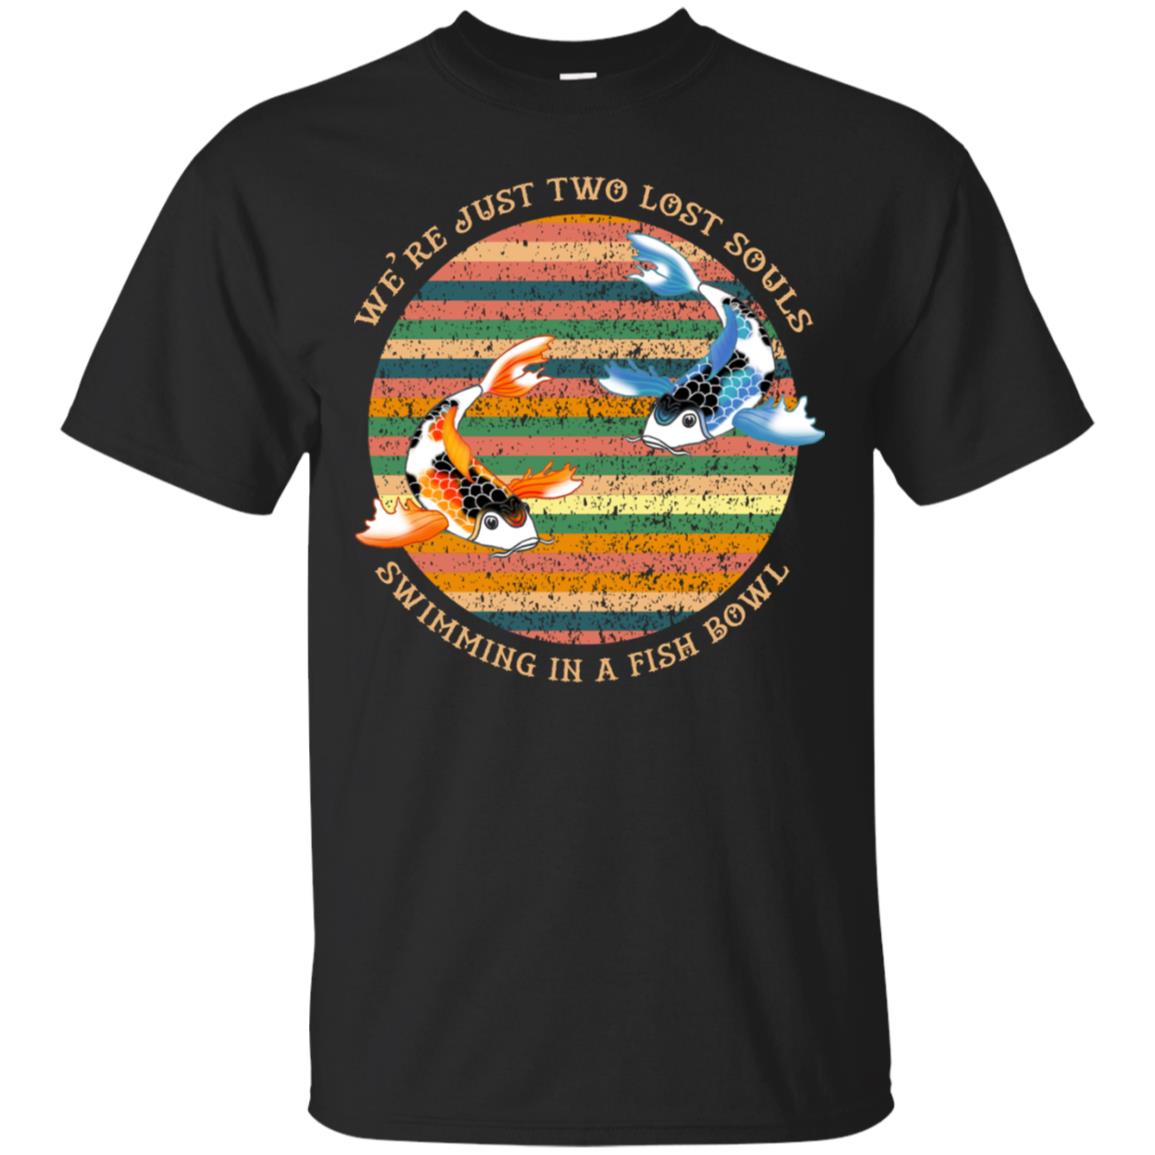 We Are Just Two Lost Souls Swimming In A Fish Bowl ShirtG200 Gildan Ultra Cotton T-Shirt